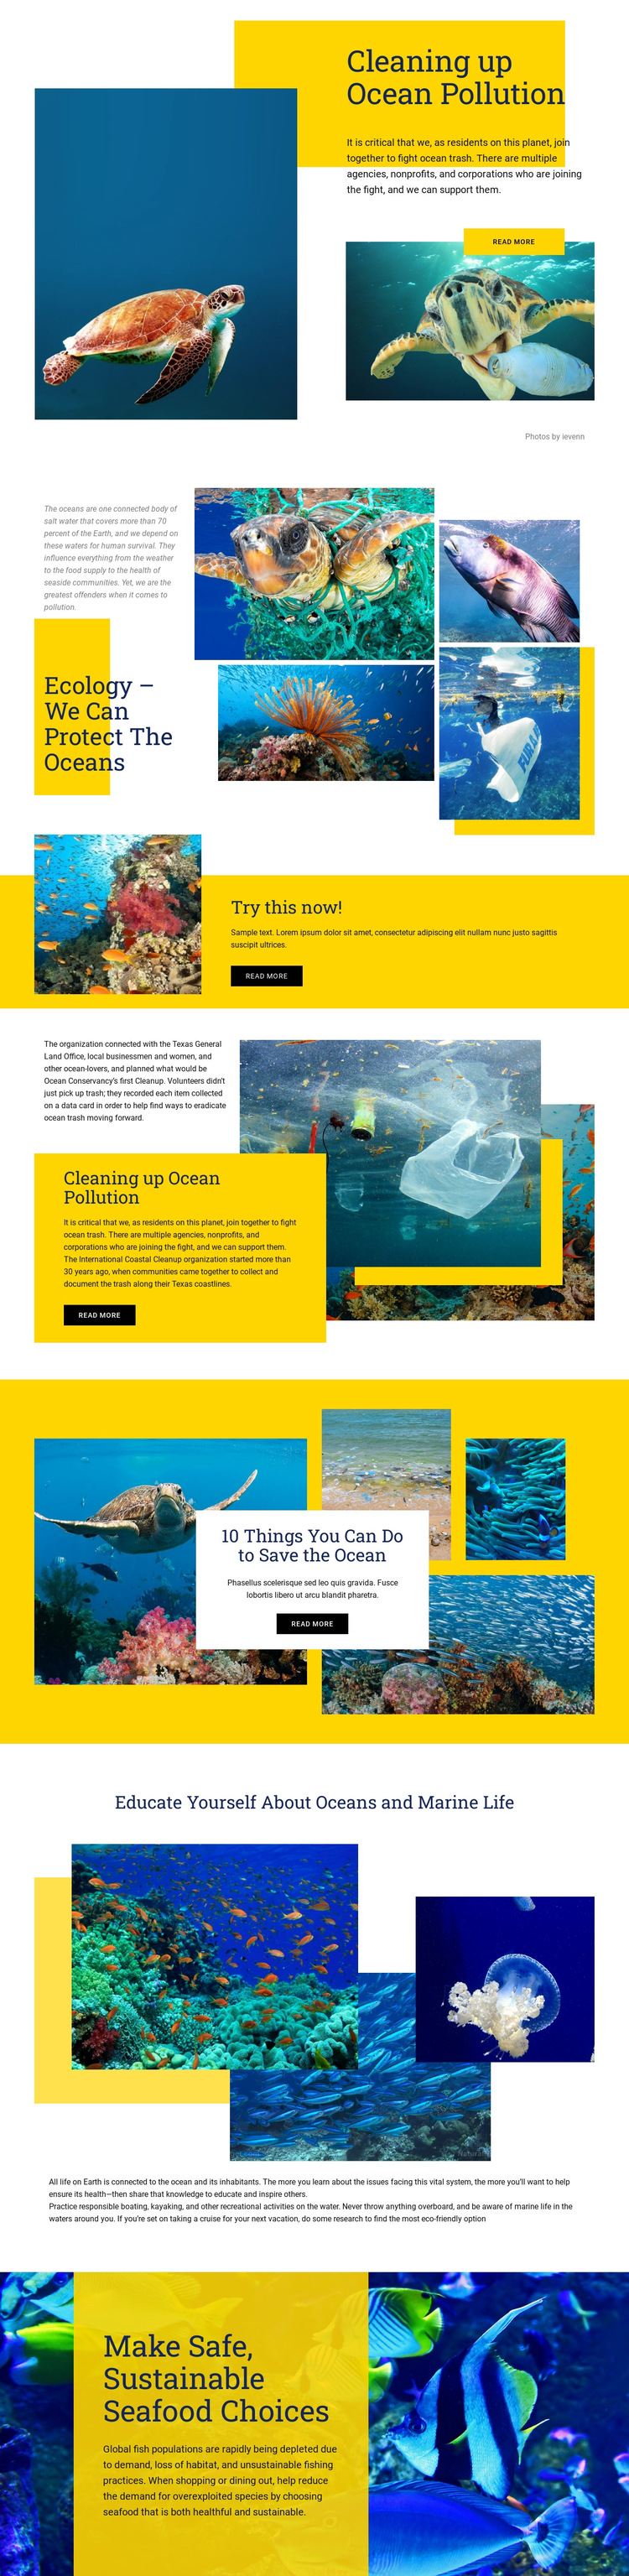 Protect The Oceans HTML5 Template